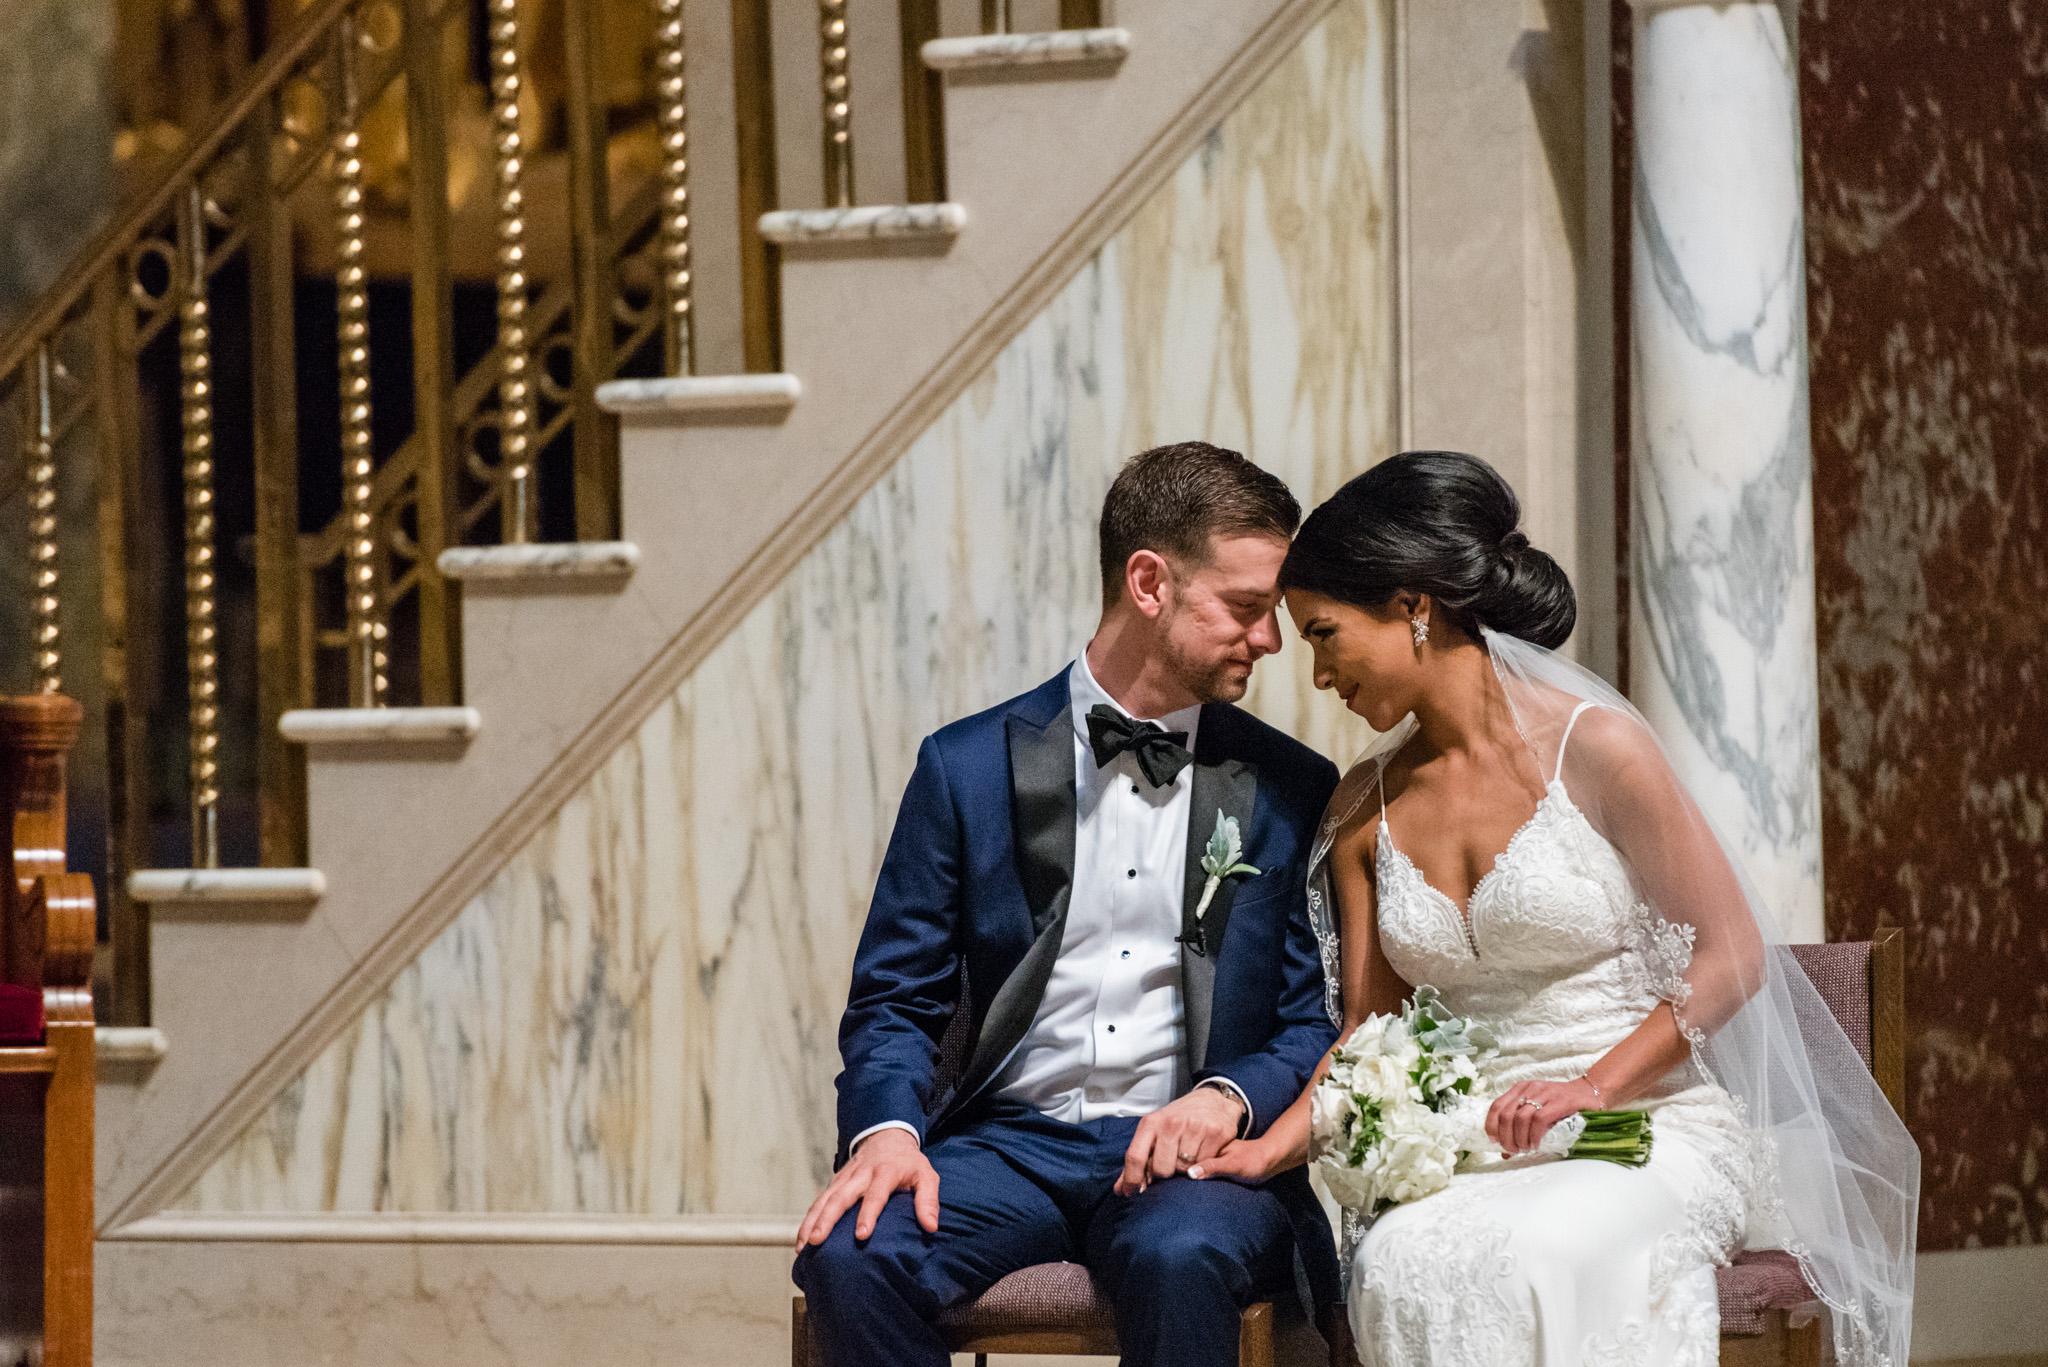 Bride and groom share a quiet moment together during their catholic ceremony